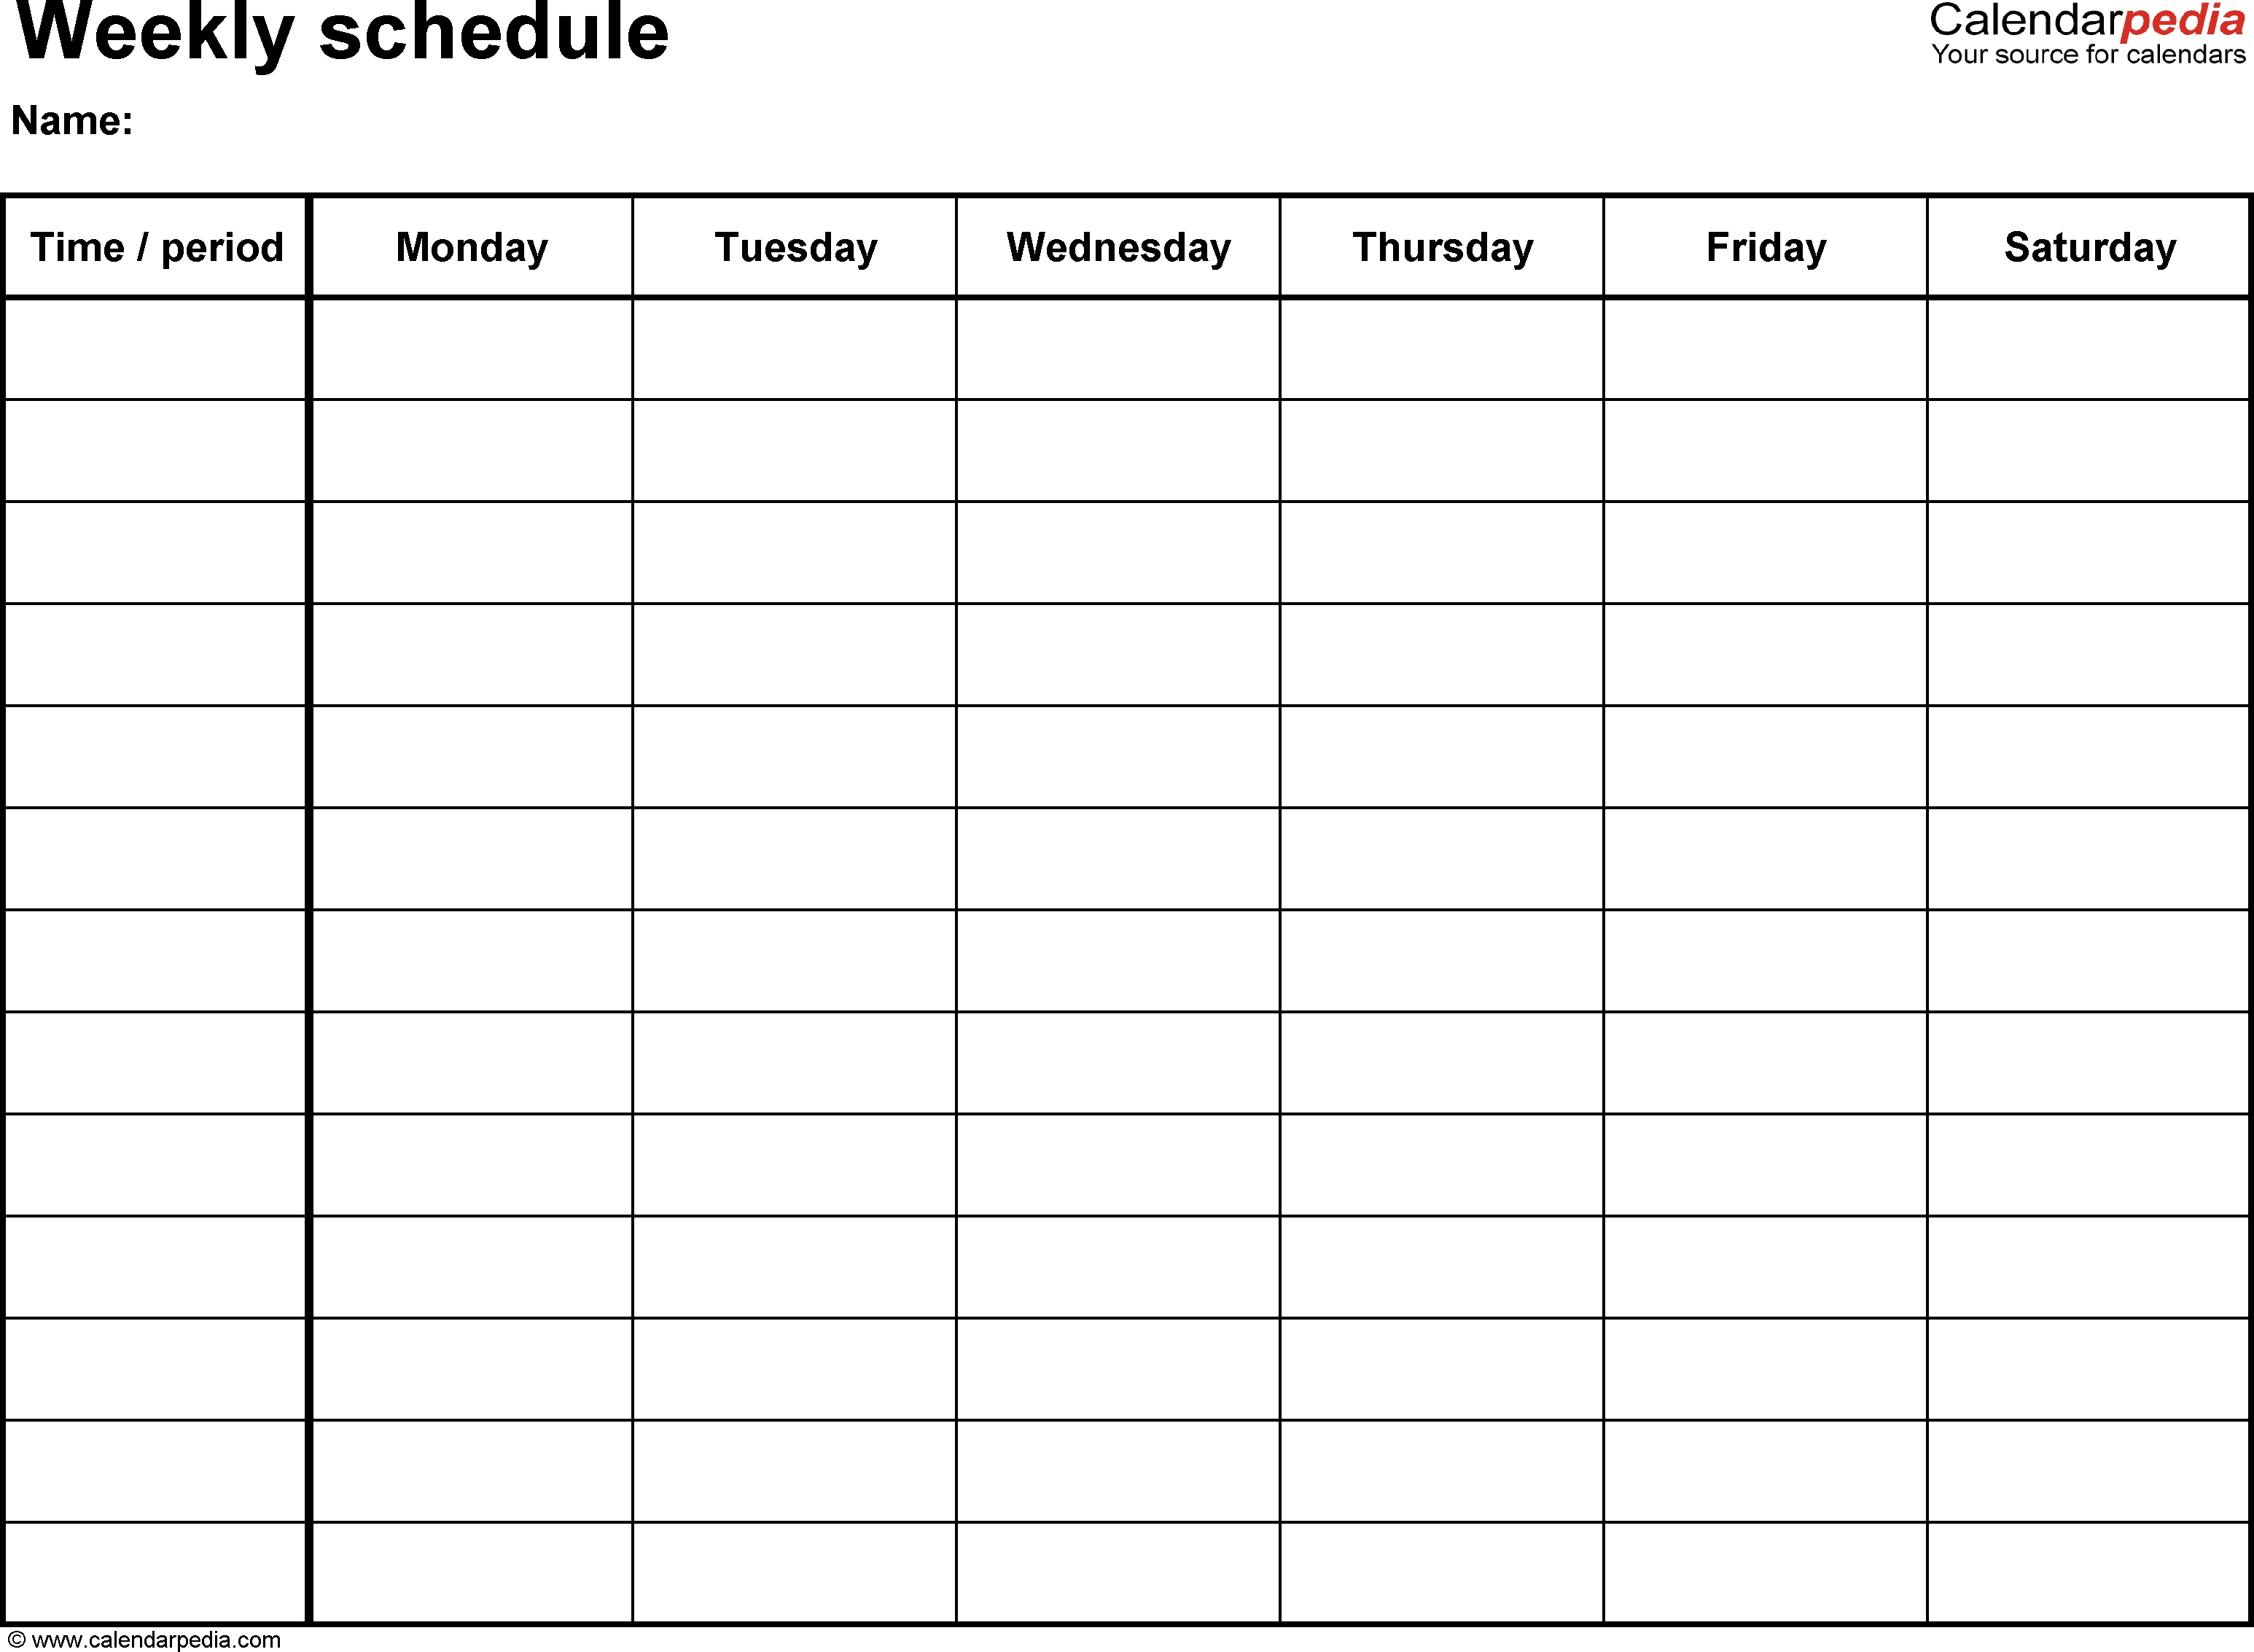 Free Weekly Schedule Templates For Word - 18 Templates with Blank Weekly Calendar Print Outs